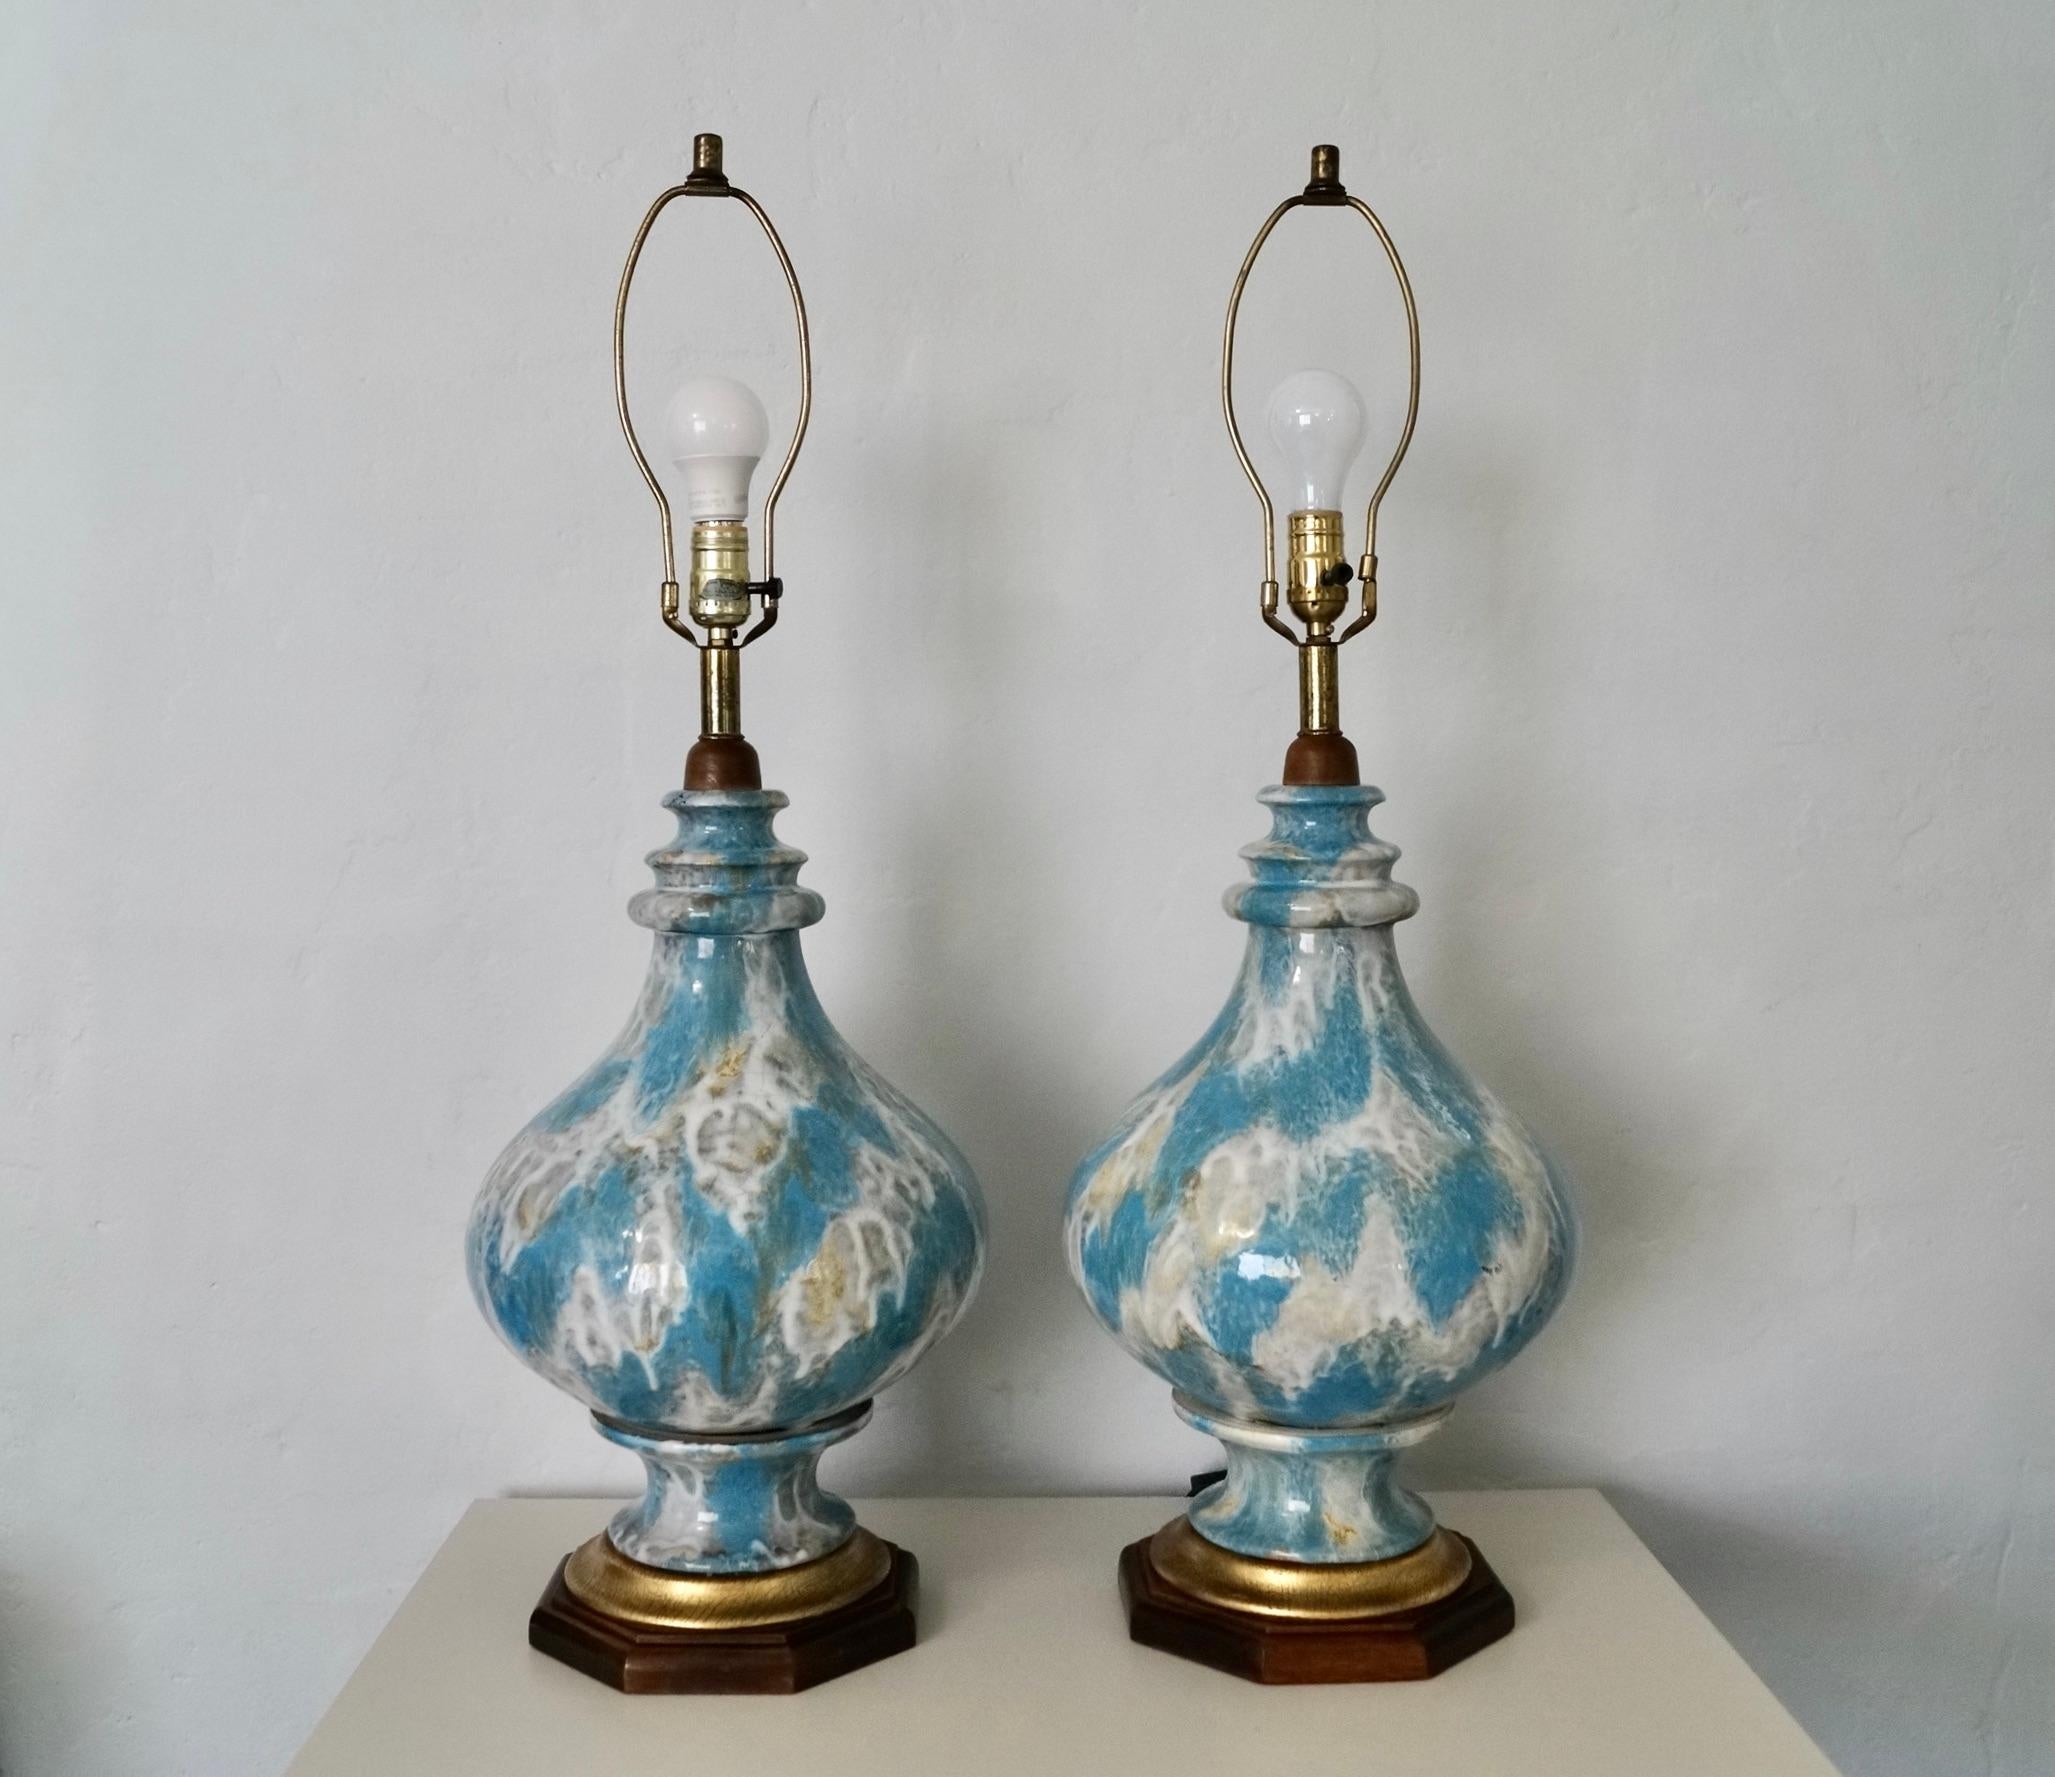 Pair of 1940's Hollywood Regency Drip Glazed Table Lamps In Good Condition For Sale In Burbank, CA